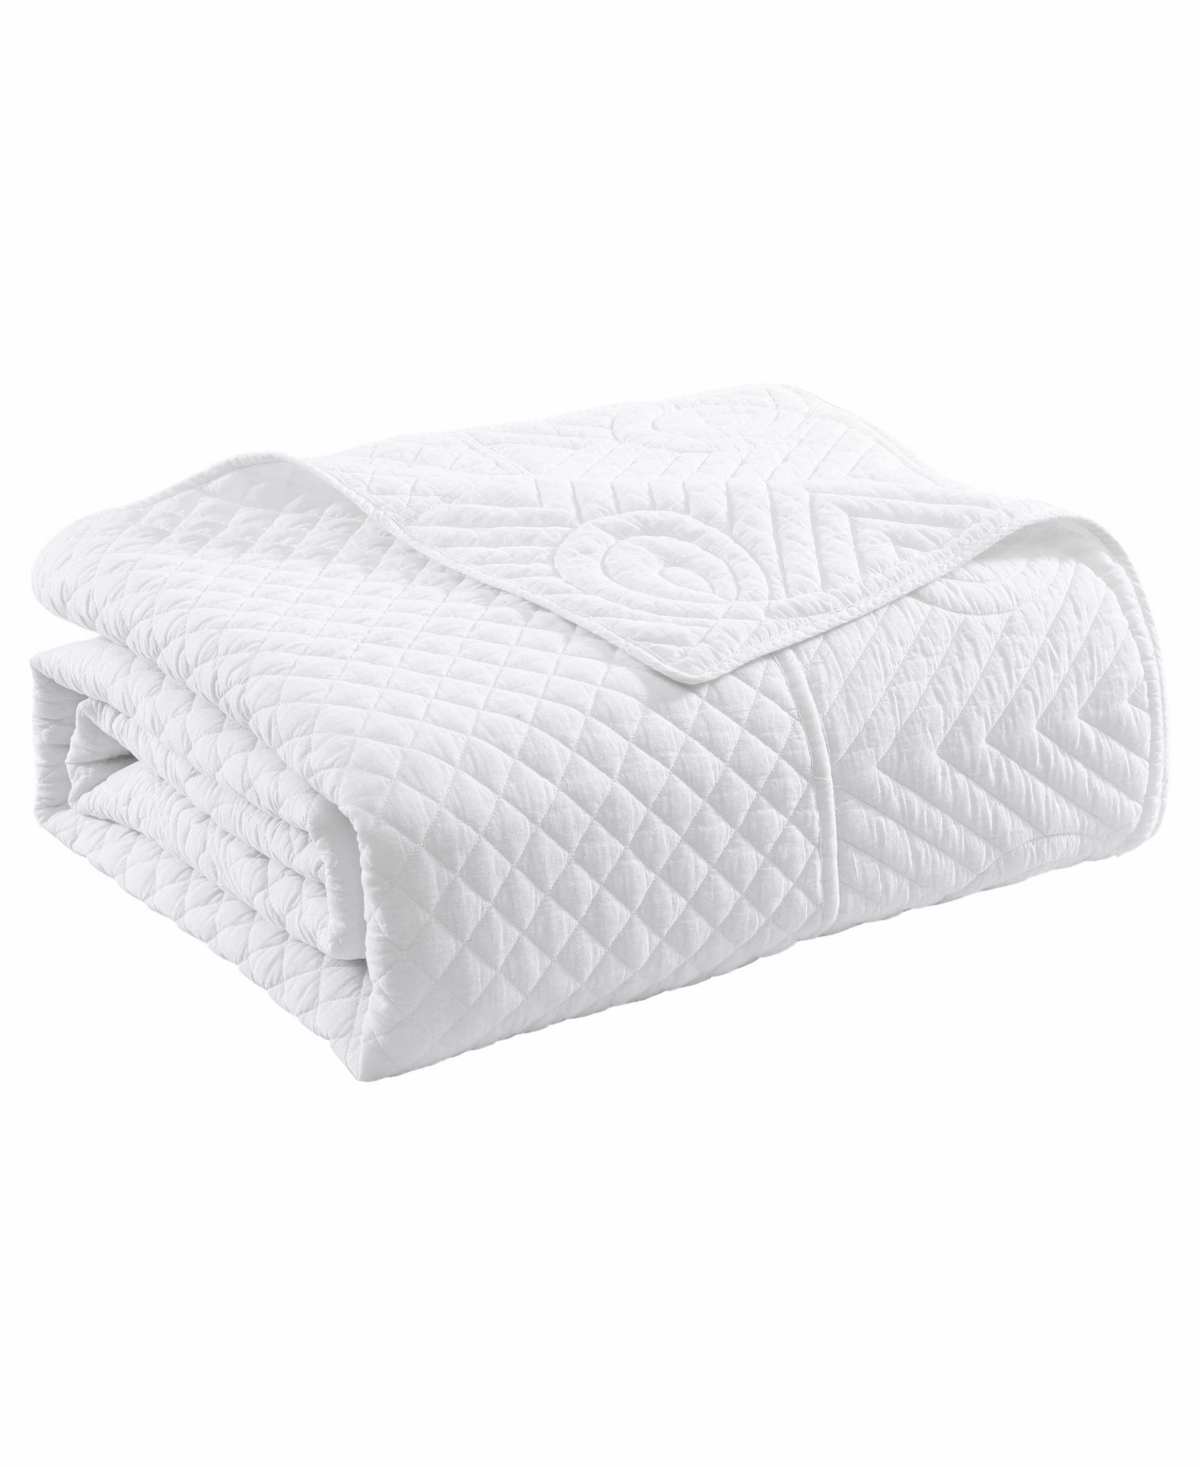 Tommy Bahama Home Pineapple Resort Cotton Quilt, King In White